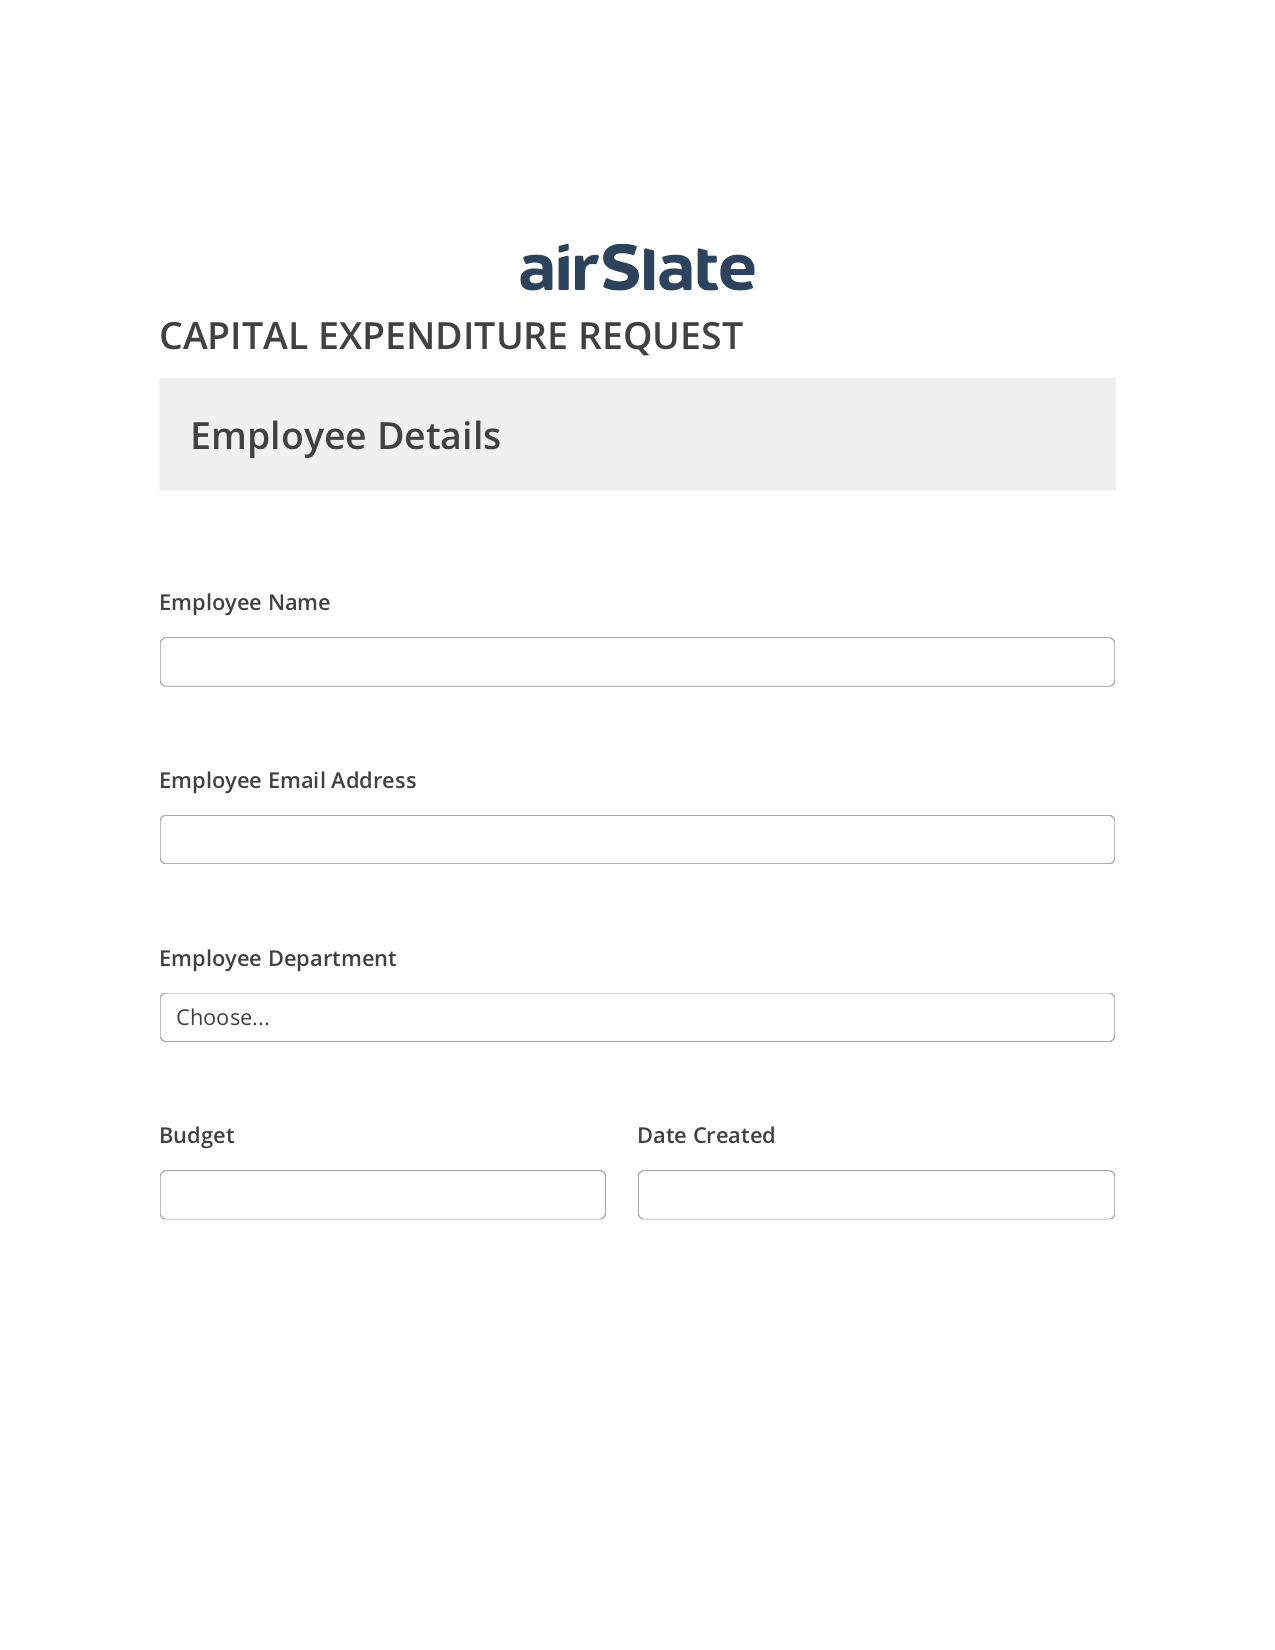 Capital Expenditure Request Approval Workflow System Bot - Slack Two-Way Binding Bot, Rename Slate Bot, Slack Notification Postfinish